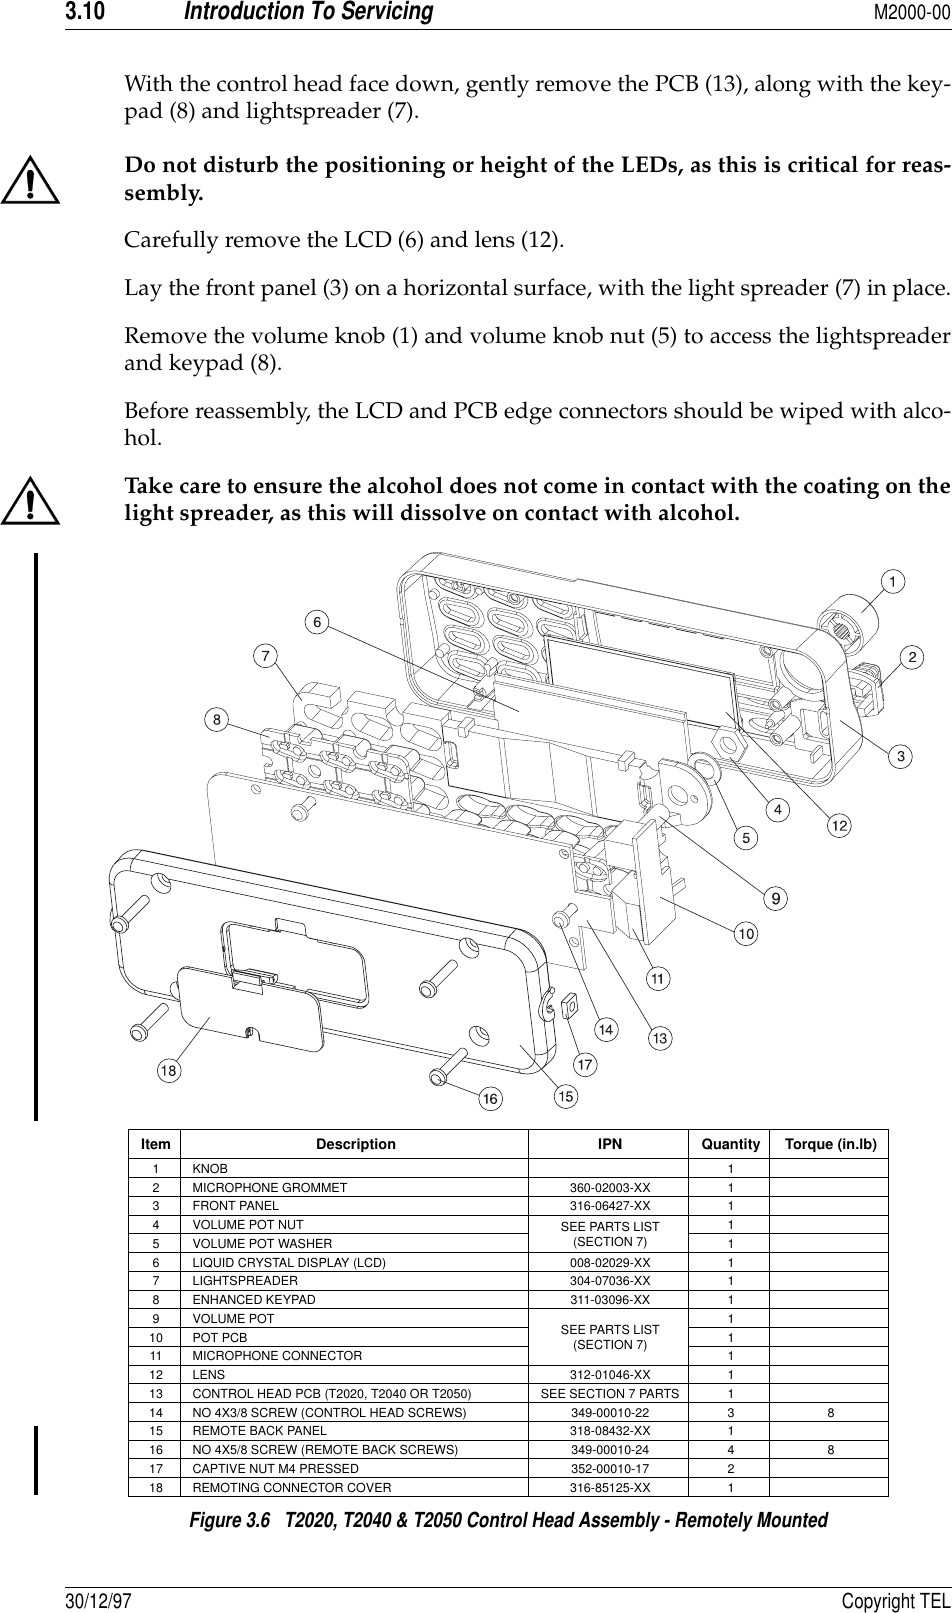 3.10Introduction To ServicingM2000-0030/12/97 Copyright TELWith the control head face down, gently remove the PCB (13), along with the key-pad (8) and lightspreader (7).Do not disturb the positioning or height of the LEDs, as this is critical for reas-sembly.Carefully remove the LCD (6) and lens (12).Lay the front panel (3) on a horizontal surface, with the light spreader (7) in place.Remove the volume knob (1) and volume knob nut (5) to access the lightspreaderand keypad (8).Before reassembly, the LCD and PCB edge connectors should be wiped with alco-hol.Take care to ensure the alcohol does not come in contact with the coating on thelight spreader, as this will dissolve on contact with alcohol.Figure 3.6   T2020, T2040 &amp; T2050 Control Head Assembly - Remotely Mounted Item Description IPN Quantity Torque (in.lb)1KNOB 12 MICROPHONE GROMMET 360-02003-XX 13 FRONT PANEL 316-06427-XX 14 VOLUME POT NUT SEE PARTS LIST(SECTION 7)15 VOLUME POT WASHER 16 LIQUID CRYSTAL DISPLAY (LCD) 008-02029-XX 17 LIGHTSPREADER 304-07036-XX 18 ENHANCED KEYPAD 311-03096-XX 19 VOLUME POT SEE PARTS LIST(SECTION 7)110 POT PCB 111 MICROPHONE CONNECTOR 112 LENS 312-01046-XX 113 CONTROL HEAD PCB (T2020, T2040 OR T2050) SEE SECTION 7 PARTS 114 NO 4X3/8 SCREW (CONTROL HEAD SCREWS) 349-00010-22 3 815 REMOTE BACK PANEL 318-08432-XX 116 NO 4X5/8 SCREW (REMOTE BACK SCREWS) 349-00010-24 4 817 CAPTIVE NUT M4 PRESSED 352-00010-17 218 REMOTING CONNECTOR COVER 316-85125-XX 1